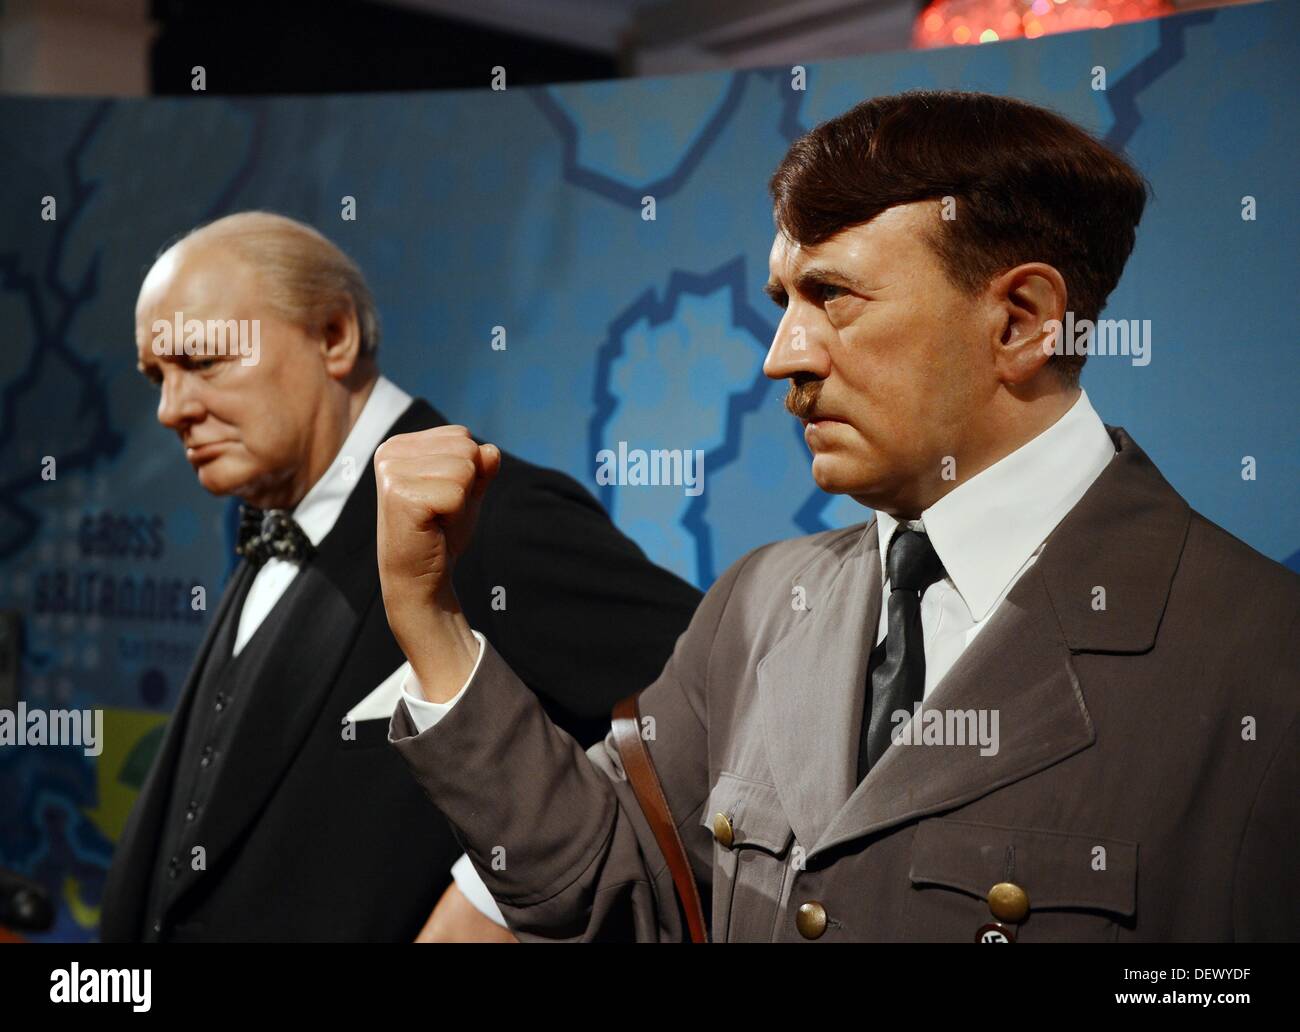 The wax figures of Winston Churchill (L) and Adolf Hitler are pictured in the wax museum Madame Tussauds in London, Great Britain, 15 September 2013. Hitler is already part of the London wax museum since the mid-1930s. In contrast to the Berlin exhibition, it is allowed to photograph the Hitler figure here. Photo: JENS KALAENE/dpa Stock Photo